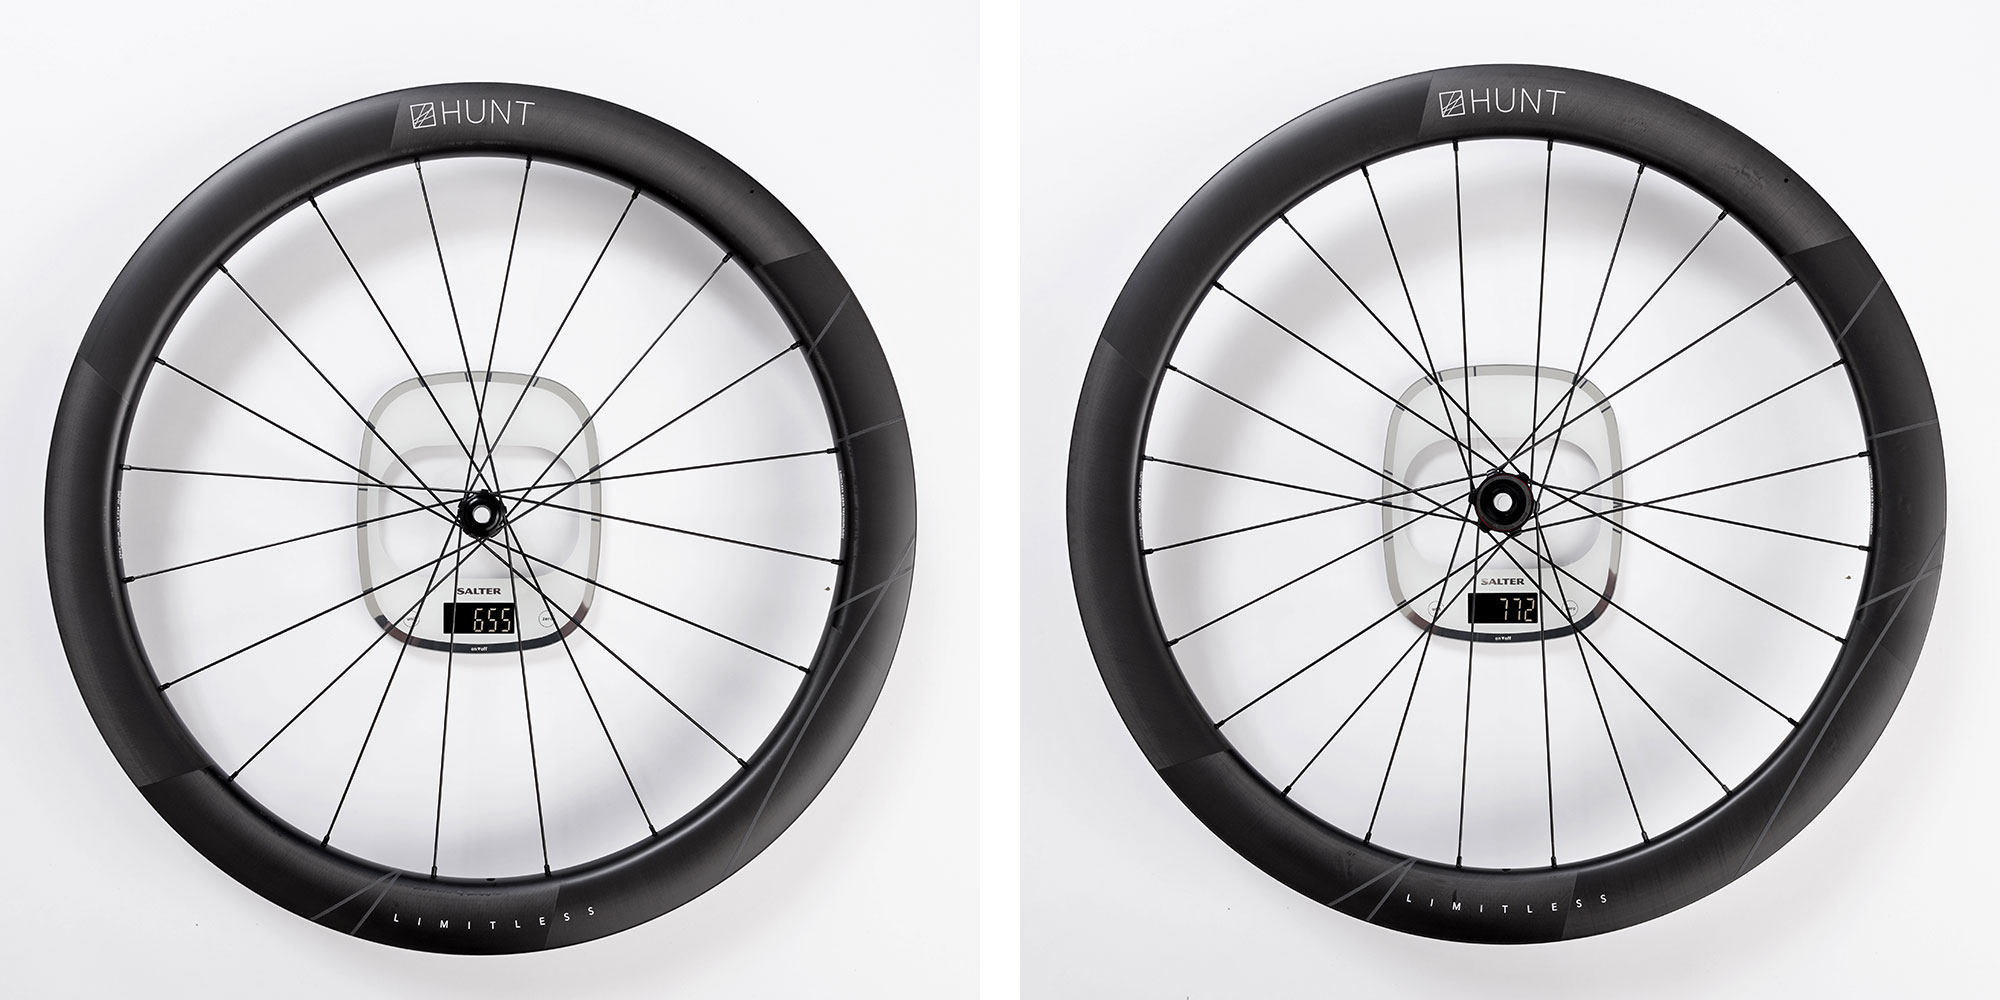 Hunt Sub50 Limitless Aero Disc road wheels are faster lighter more aerodynamic, 1427 actual weight with steel spokes